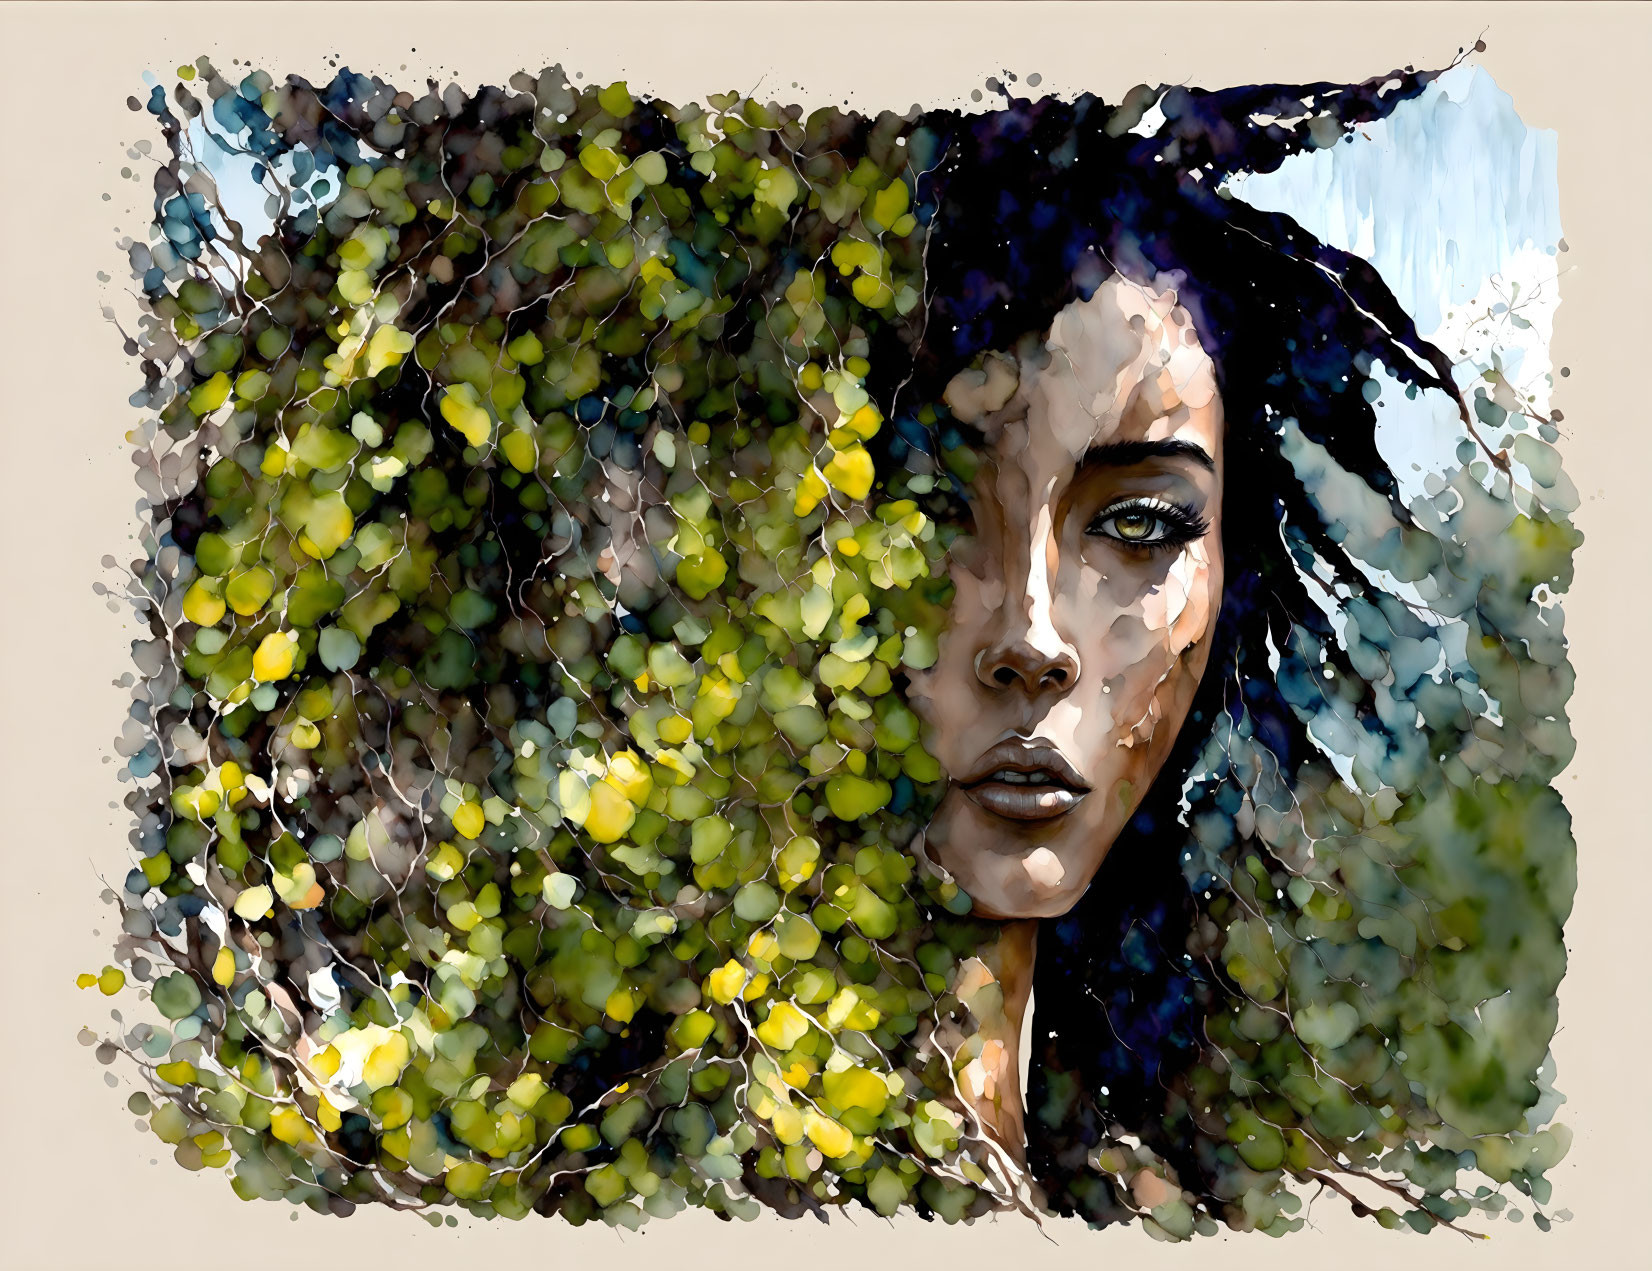 Digital artwork: Woman's face merges with green foliage and yellow flowers in watercolor style